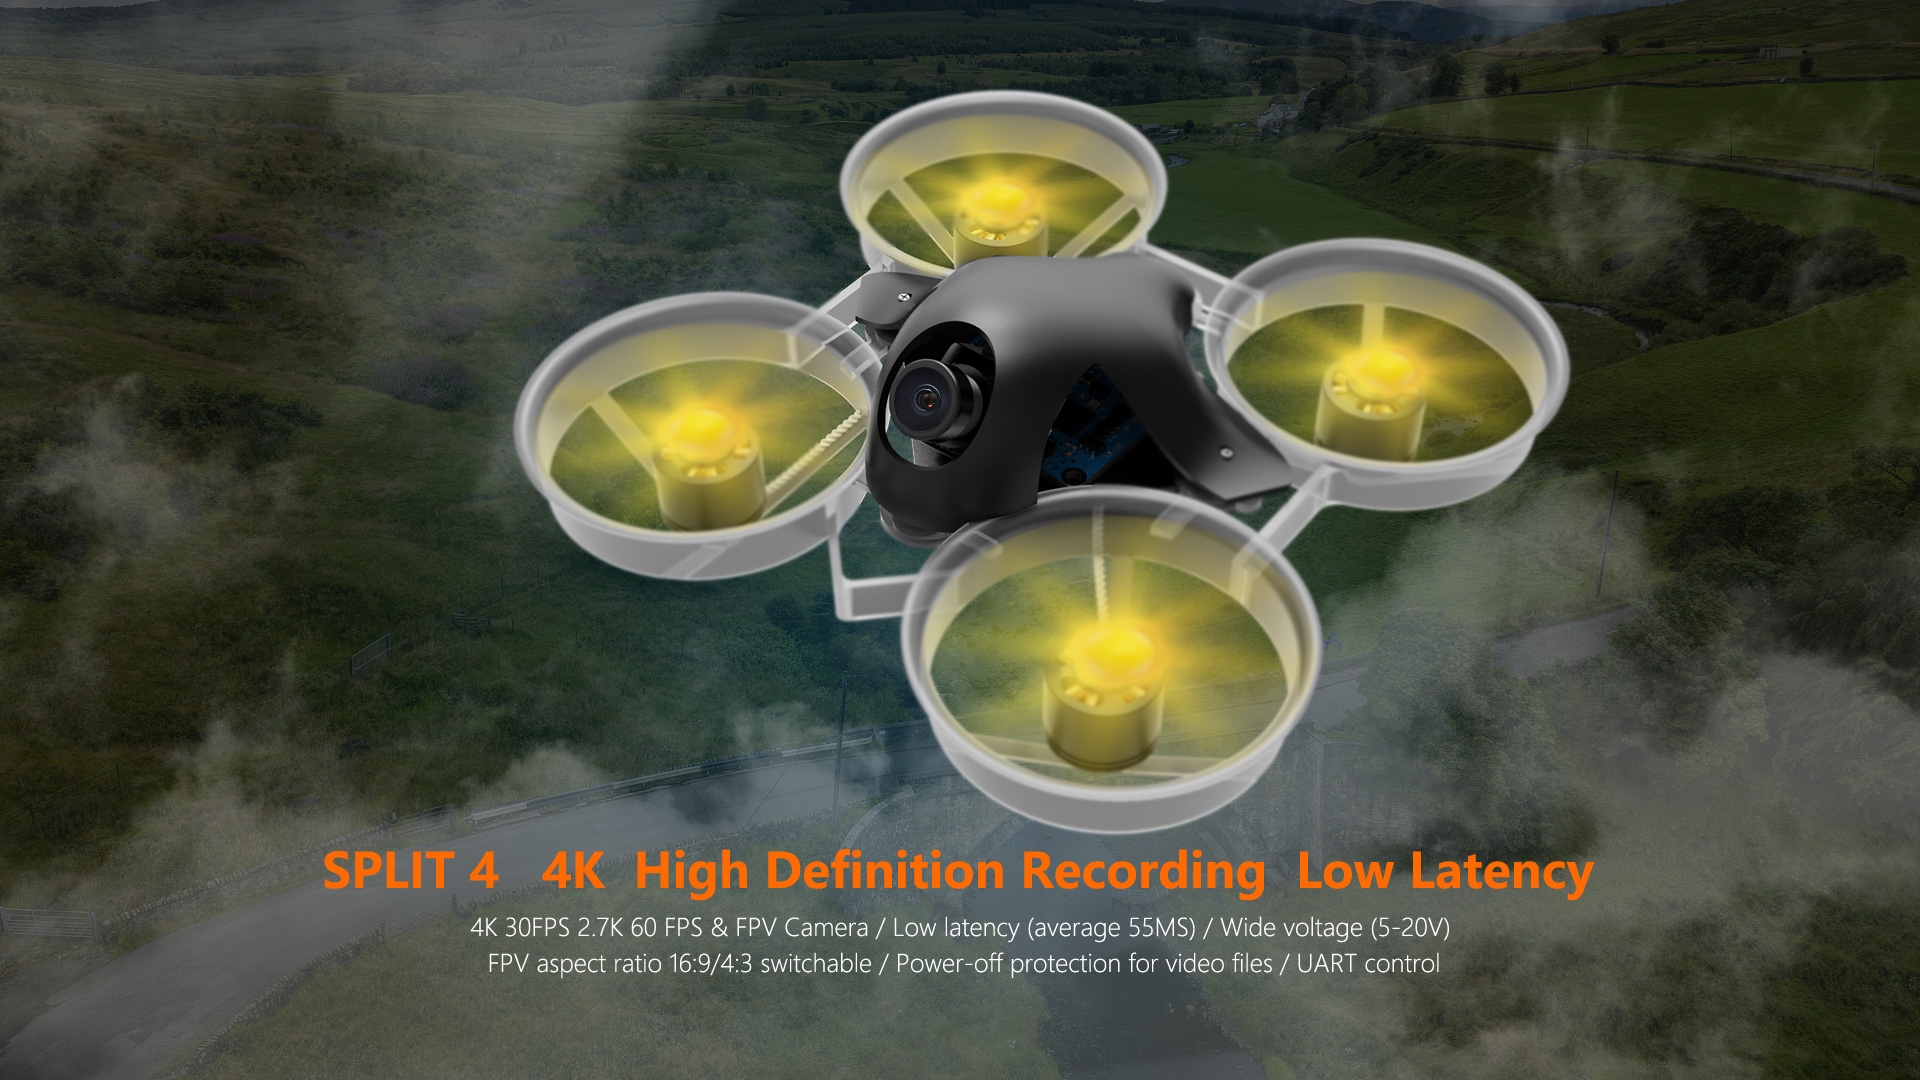 RunCam Split 4 4K High Definition Recording / Low Latency FPV 2 IN 1 FPV Camera 16:9/4:3 NTSC/PAL Switchable For RC Racing Drone